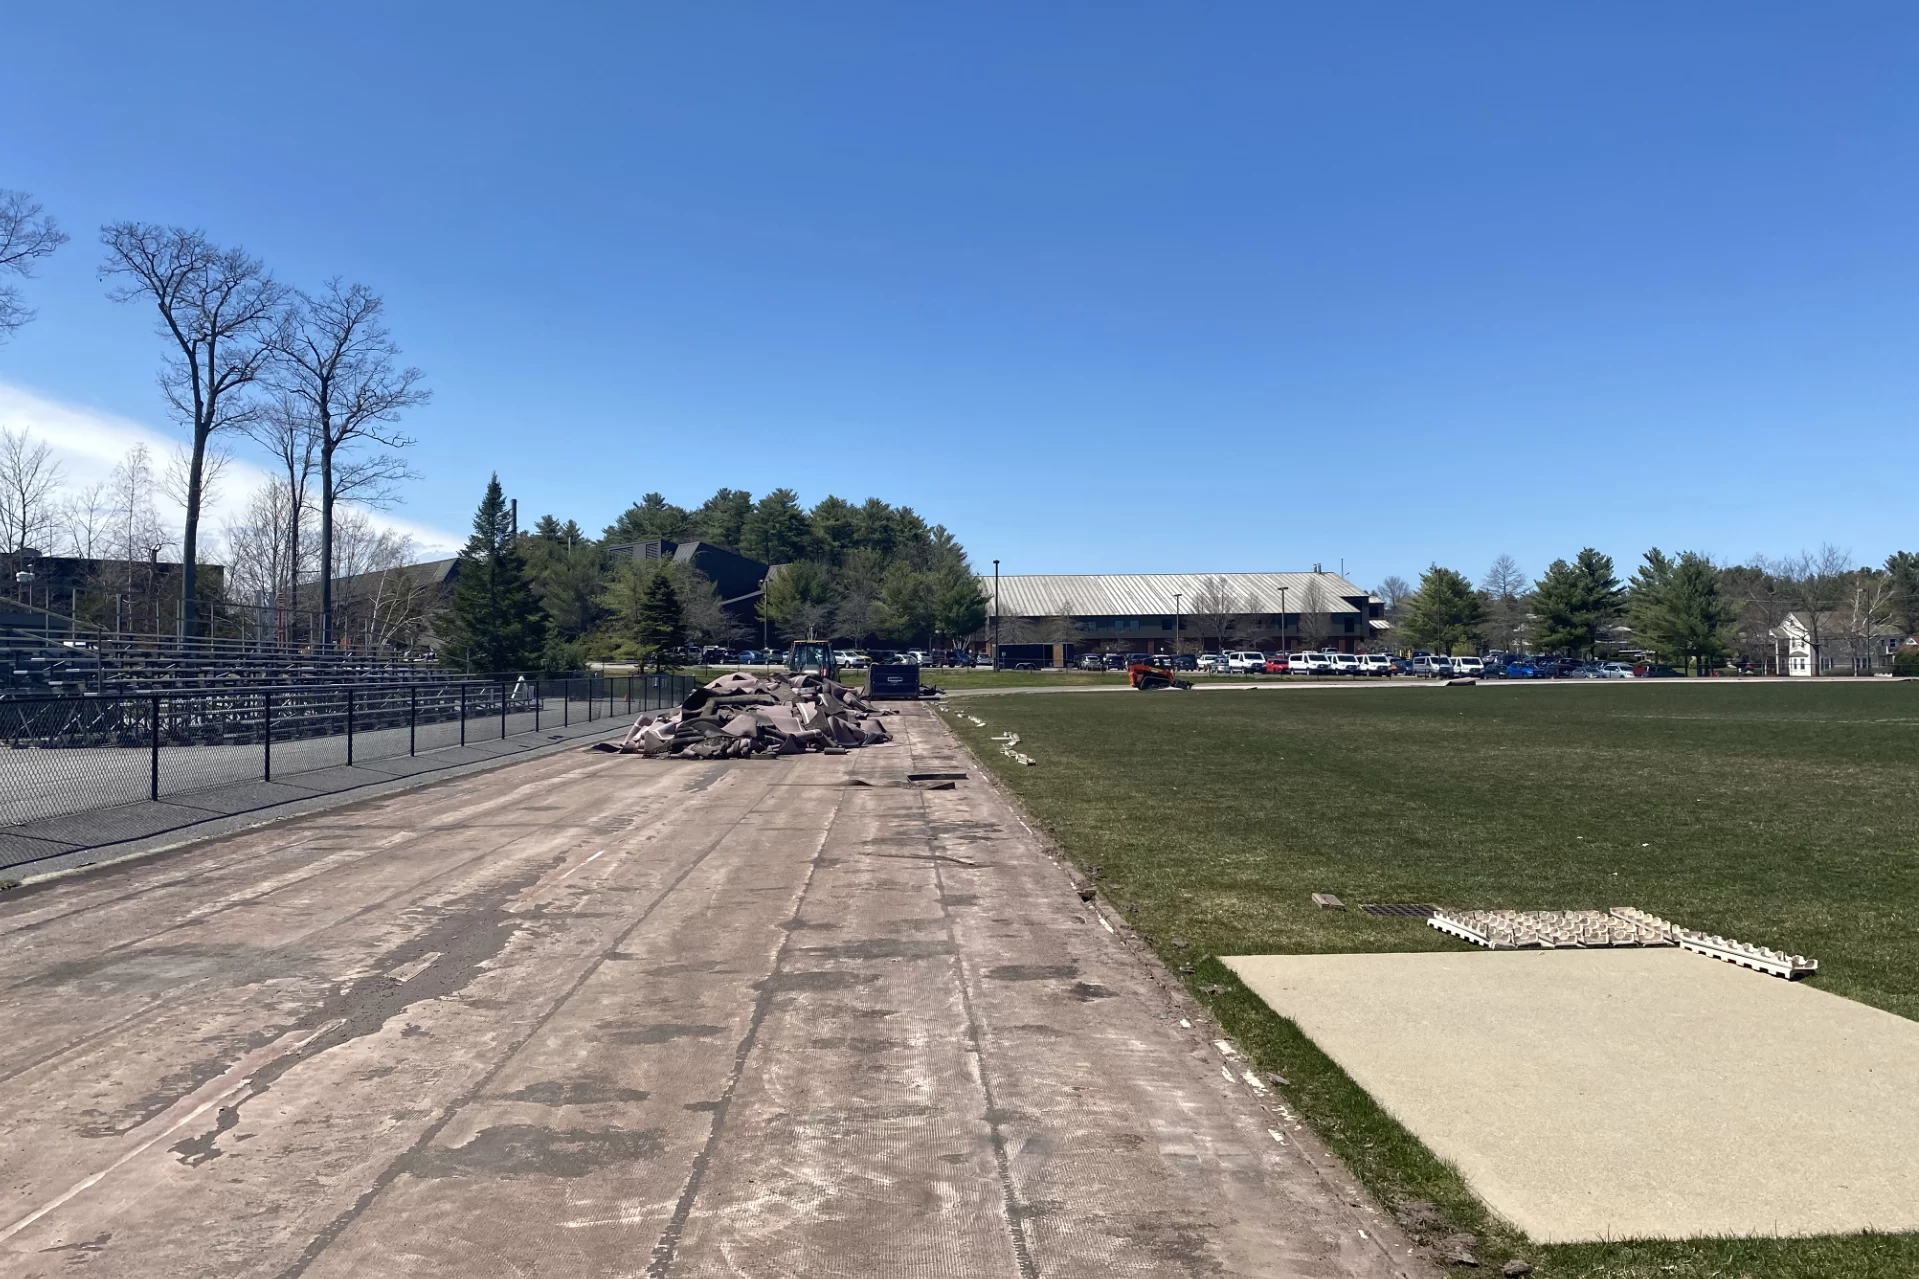 In this May 2 image of the Russell Street track complex, the heap at center left is the old Mondo track surface, scraped up and awaiting disposal. (Paul Farnsworth/Bates College)